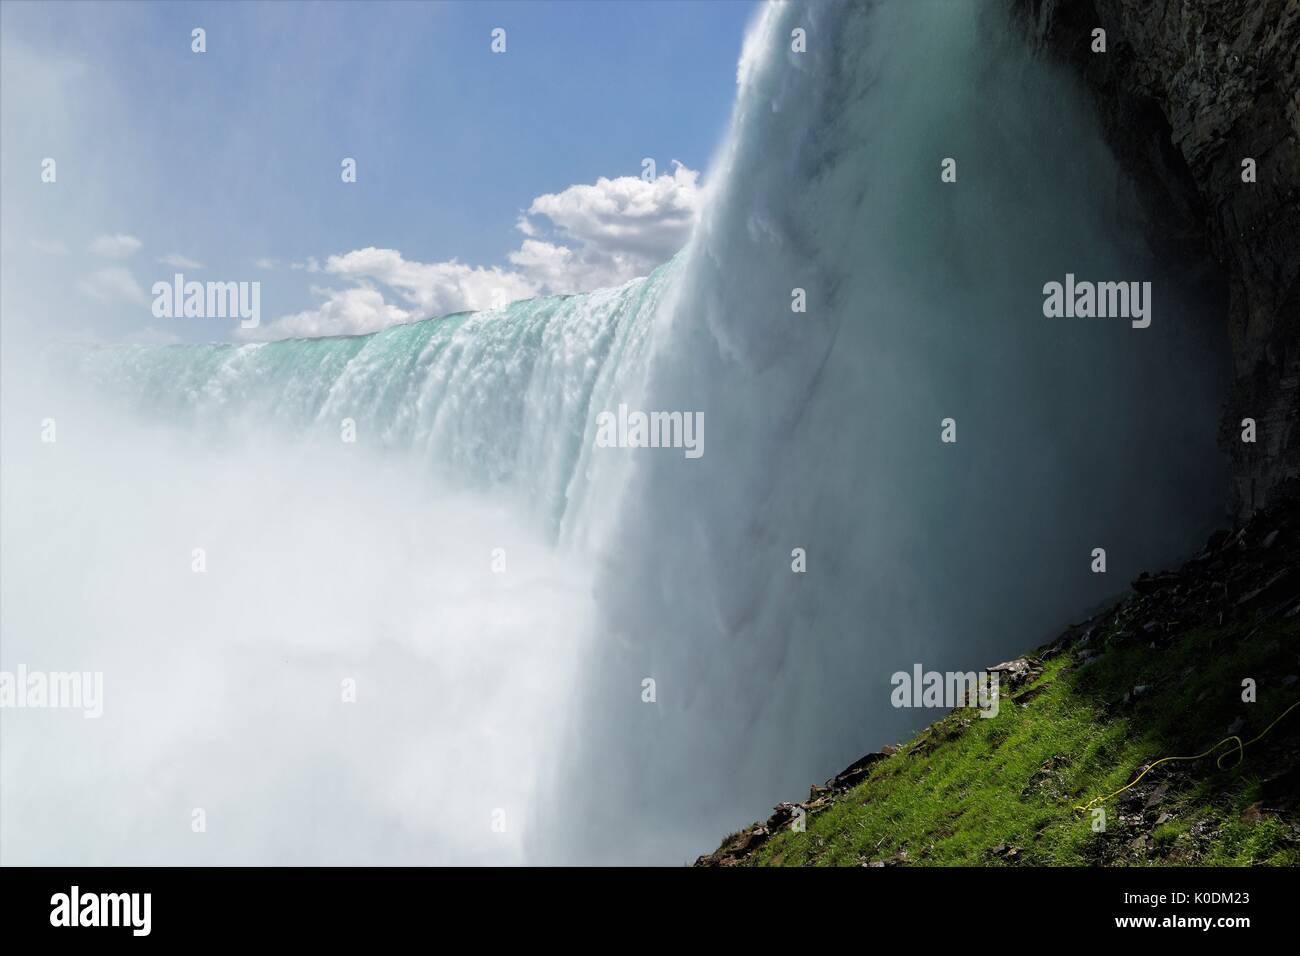 Niagara Falls - waterfall and green grass land under a blue sky with white clouds Stock Photo